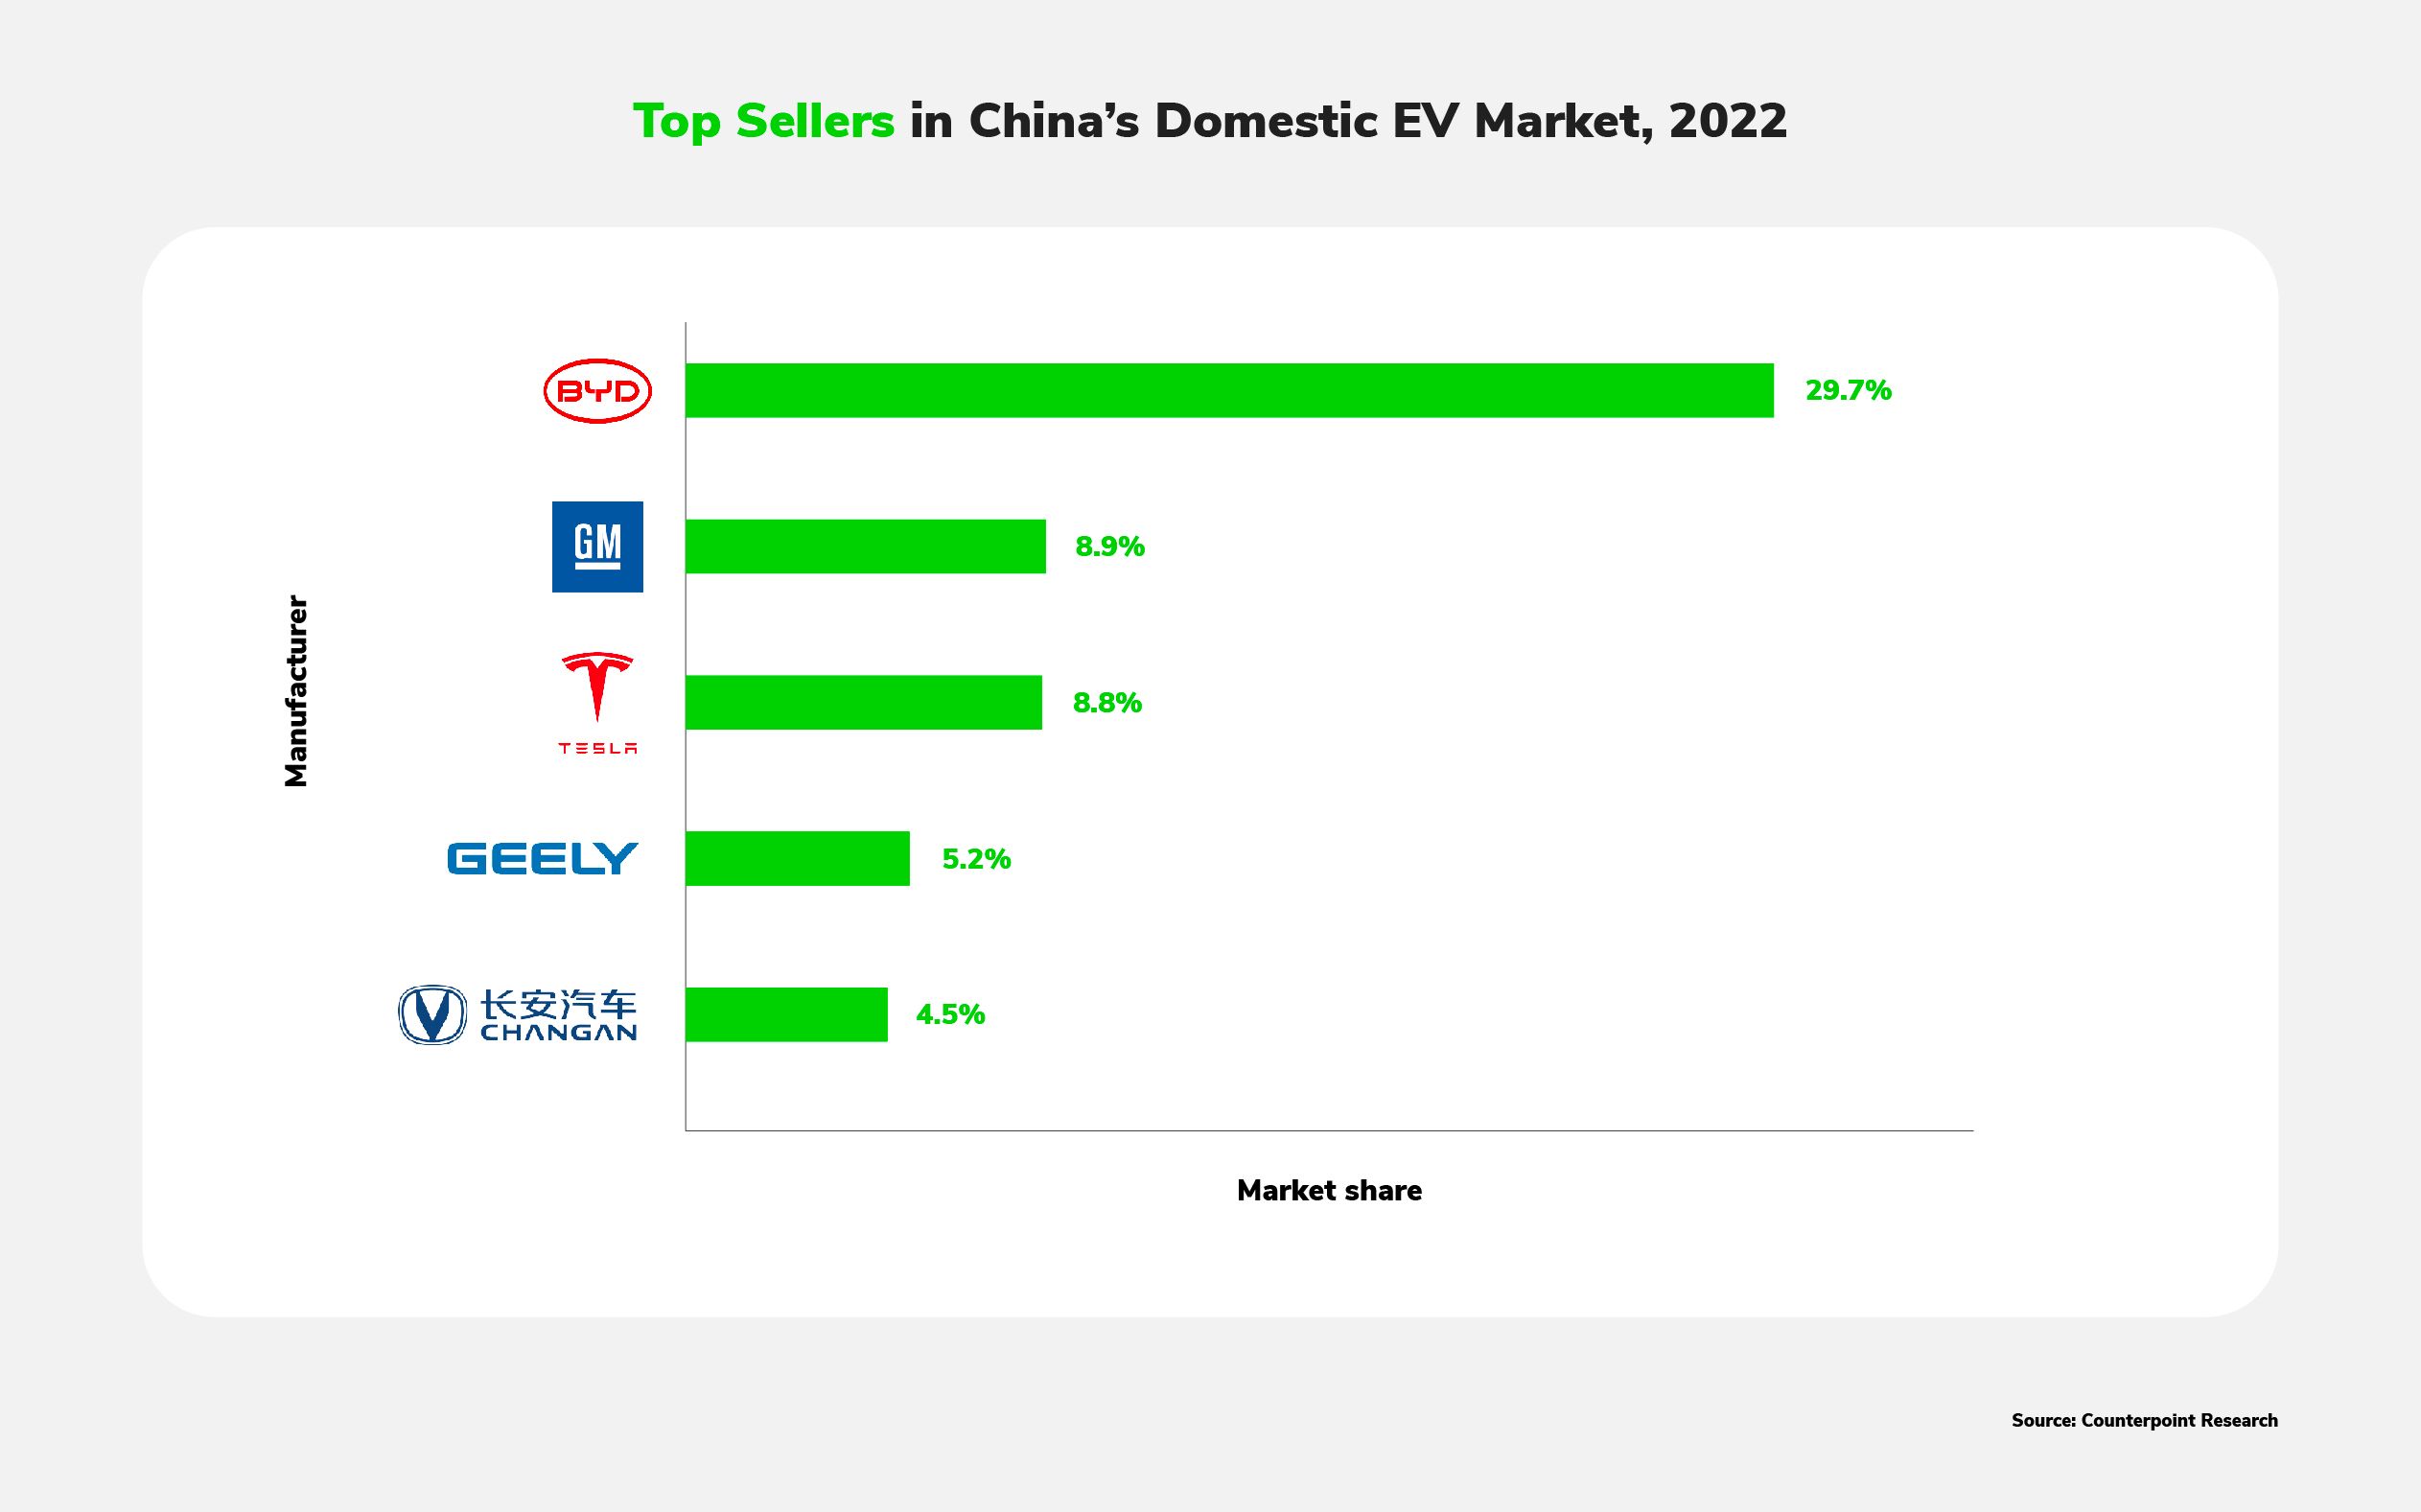 A bar chart showing the market share for China's top-selling EV manufacturers in 2022